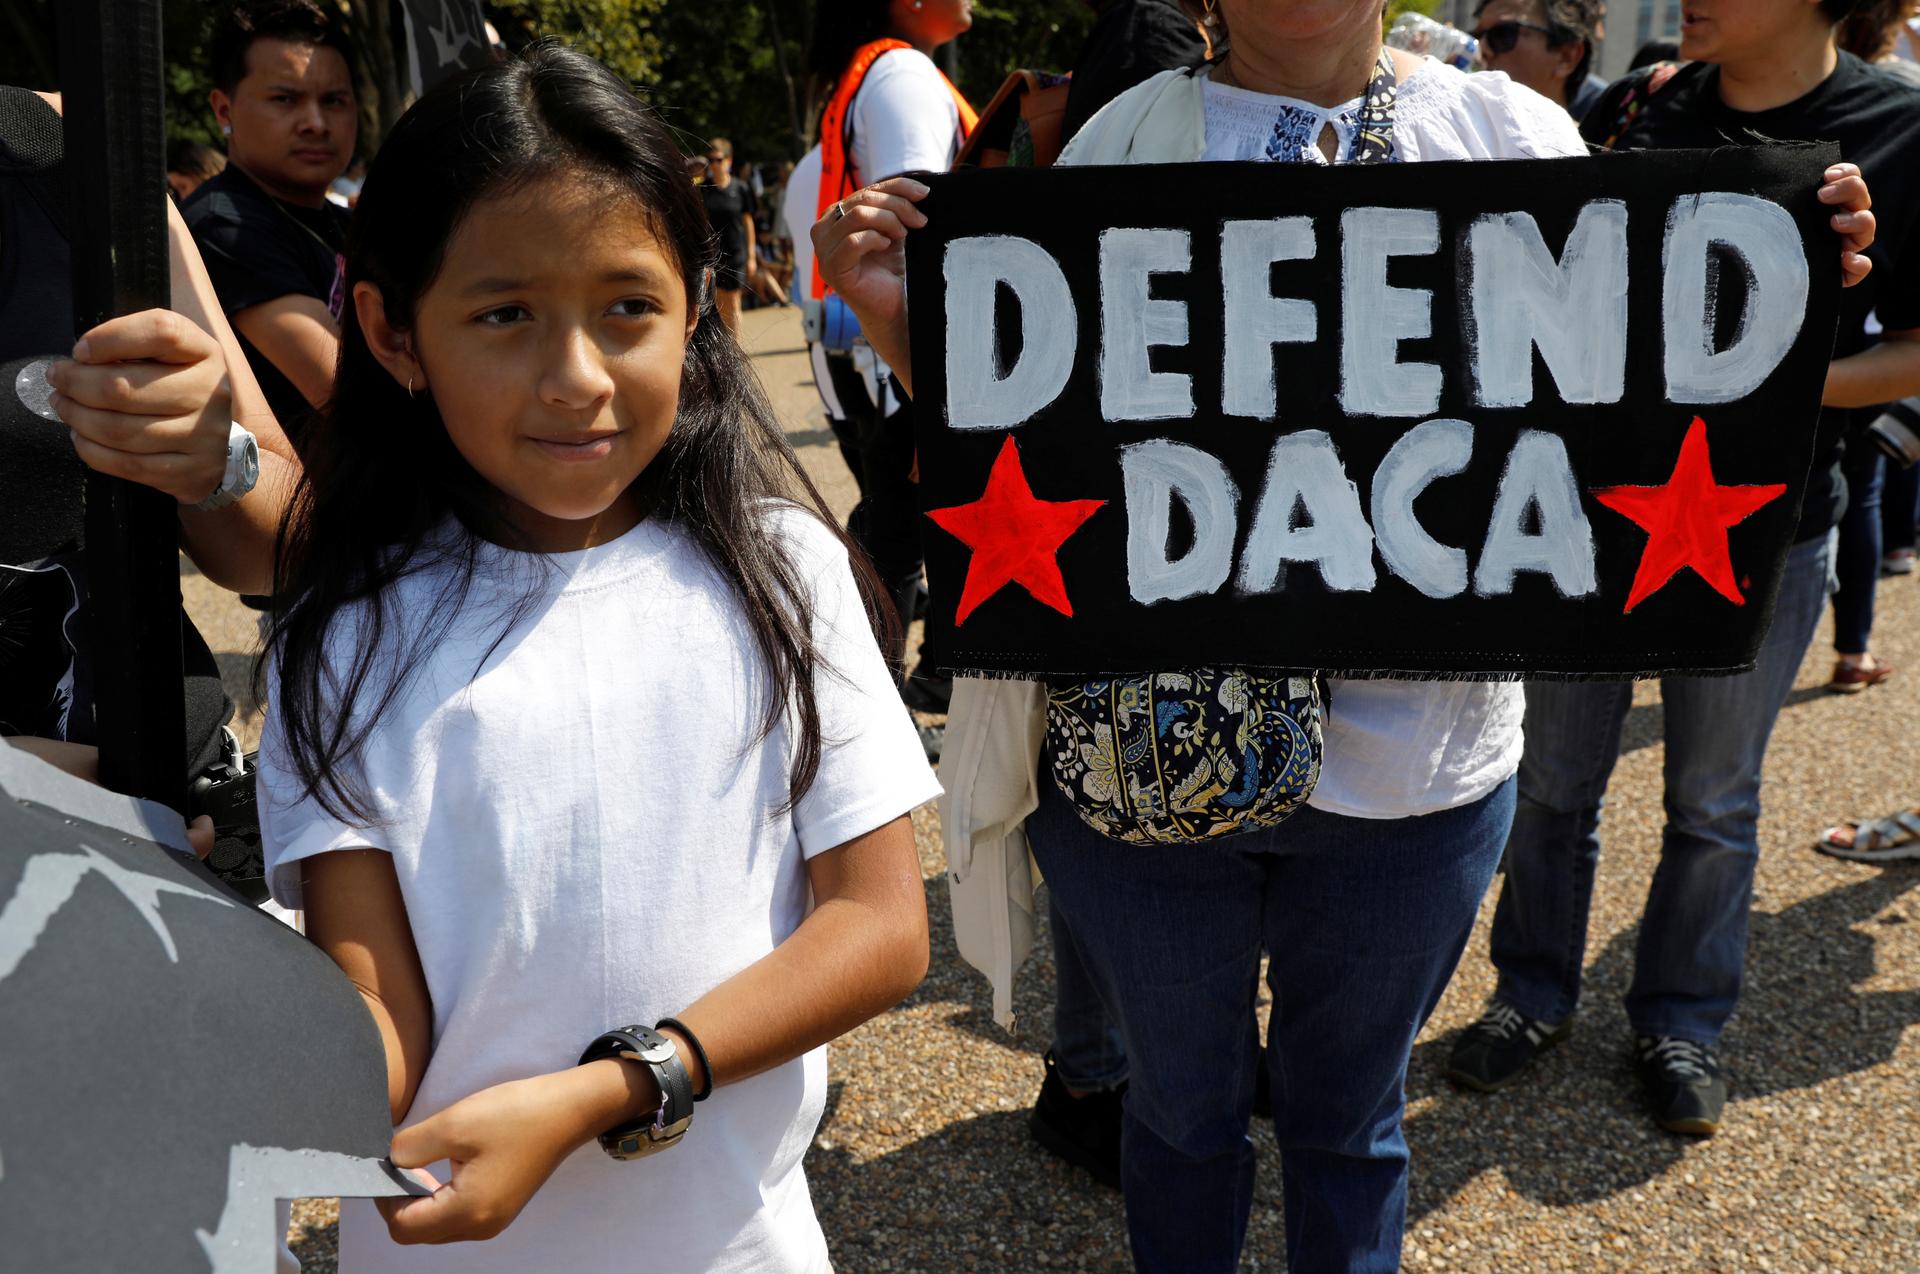 Demonstrators hold signs during a protest in front of the White House after the Trump administration on Tuesday scrapped the Deferred Action for Childhood Arrivals (DACA), a program that protects from deportation almost 800,000 young men and women who wer